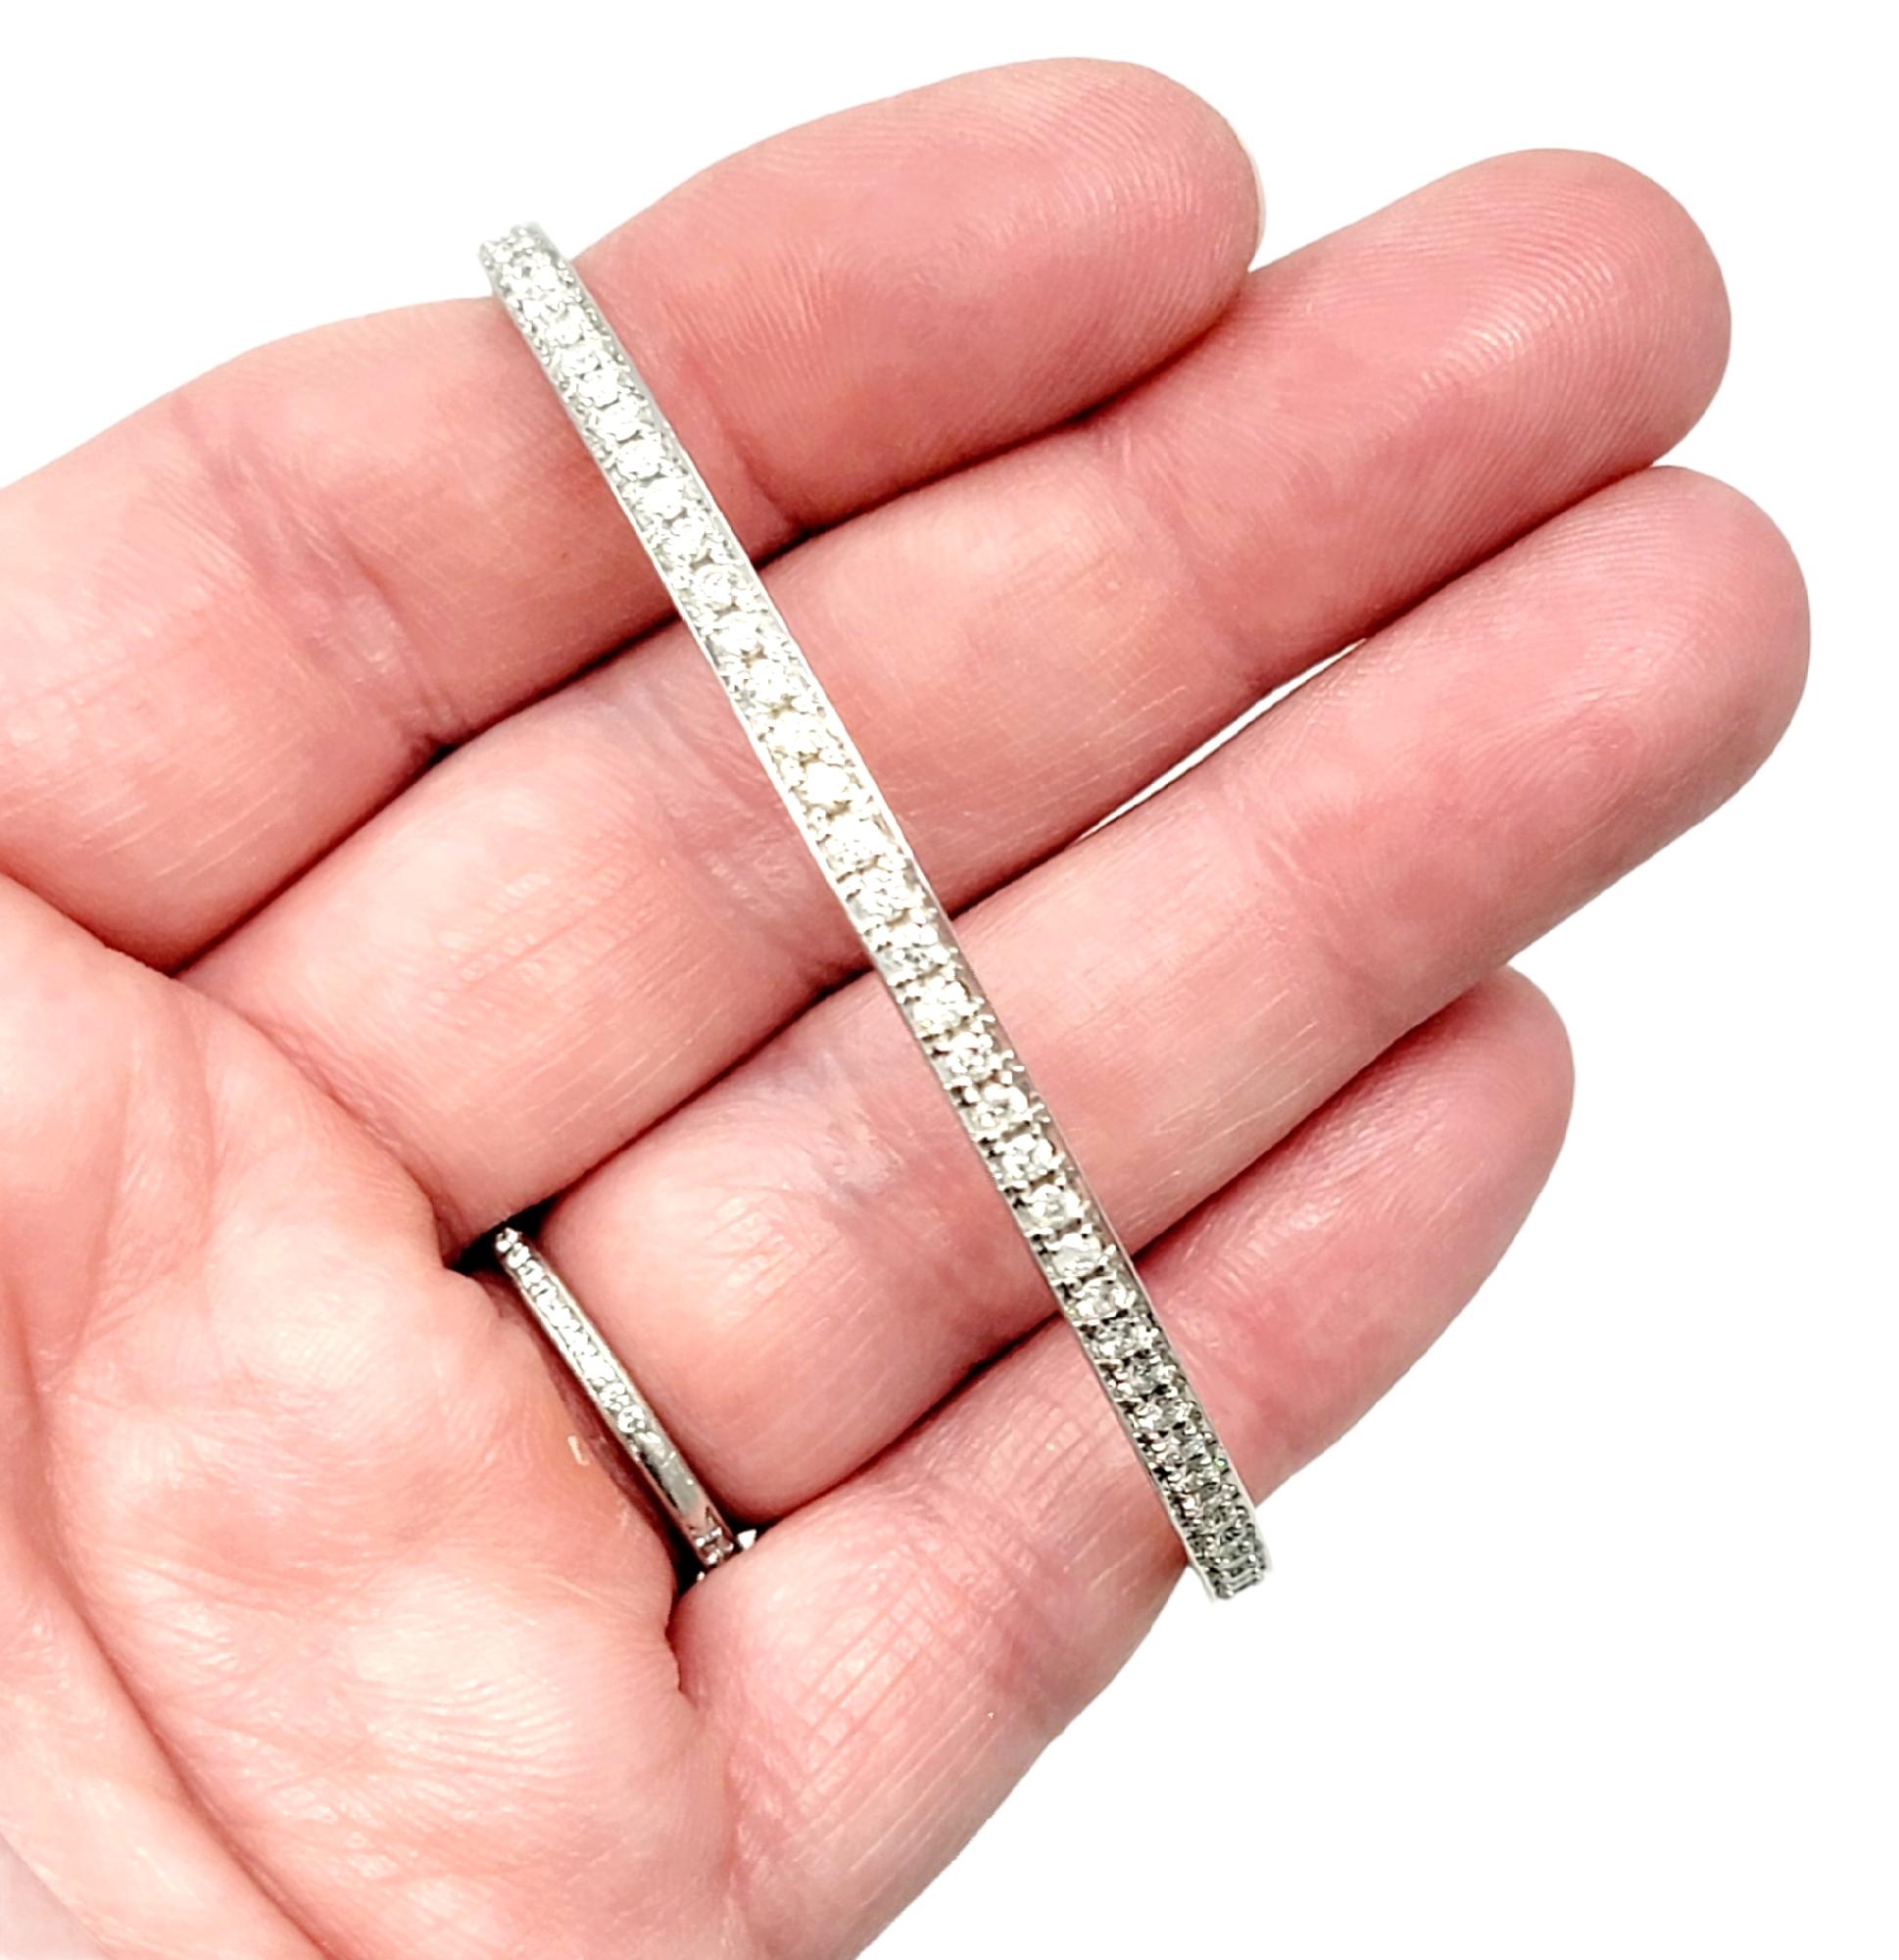 Simple yet stunning diamond eternity bracelet. This delicate paved bangle bracelet boasts an ultra feminine feel, while the sleek simplicity gives it a modern elegance. It features 91 natural round brilliant diamonds, H-I in color and SI-I2 in